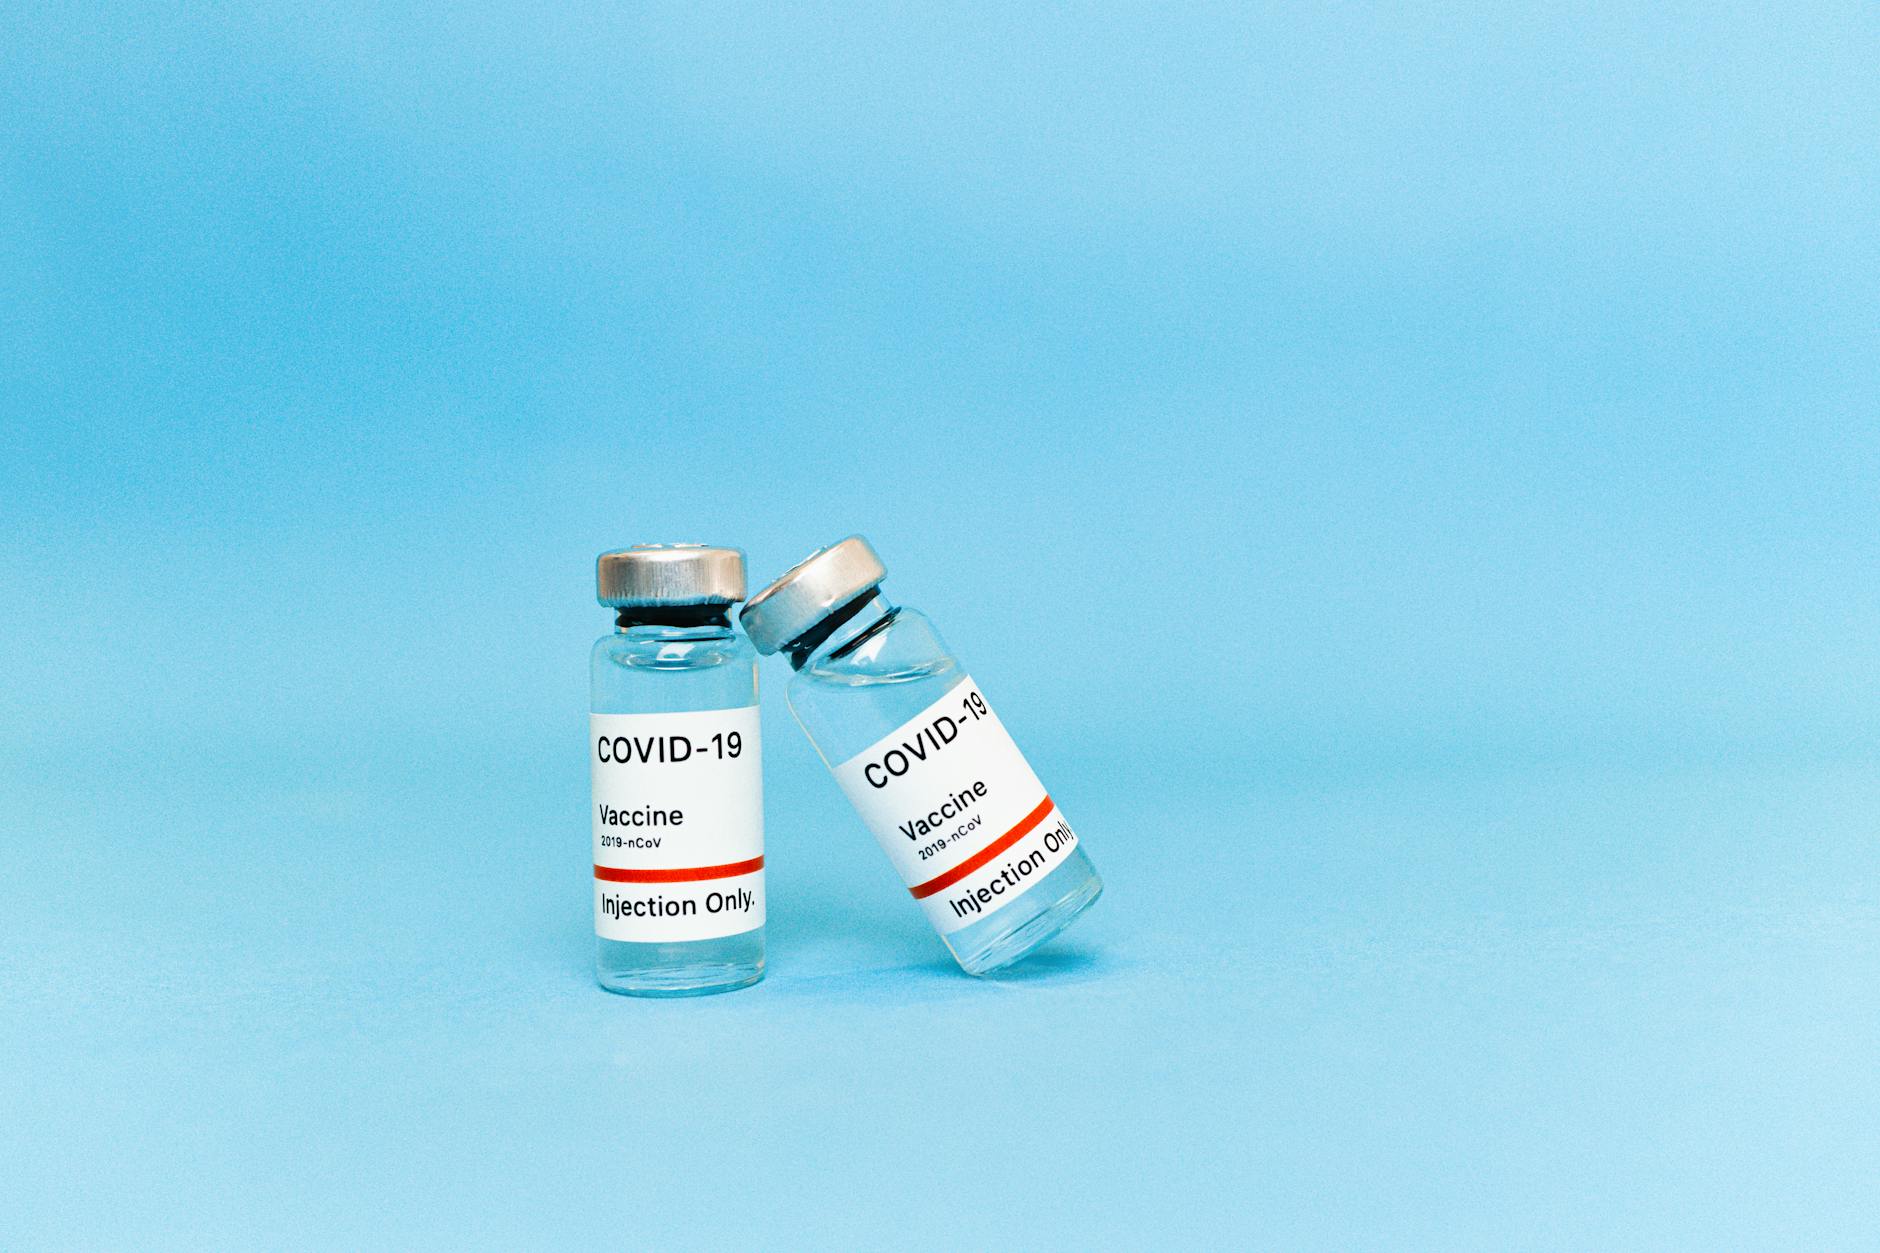 covid vaccine bottles on blue surface